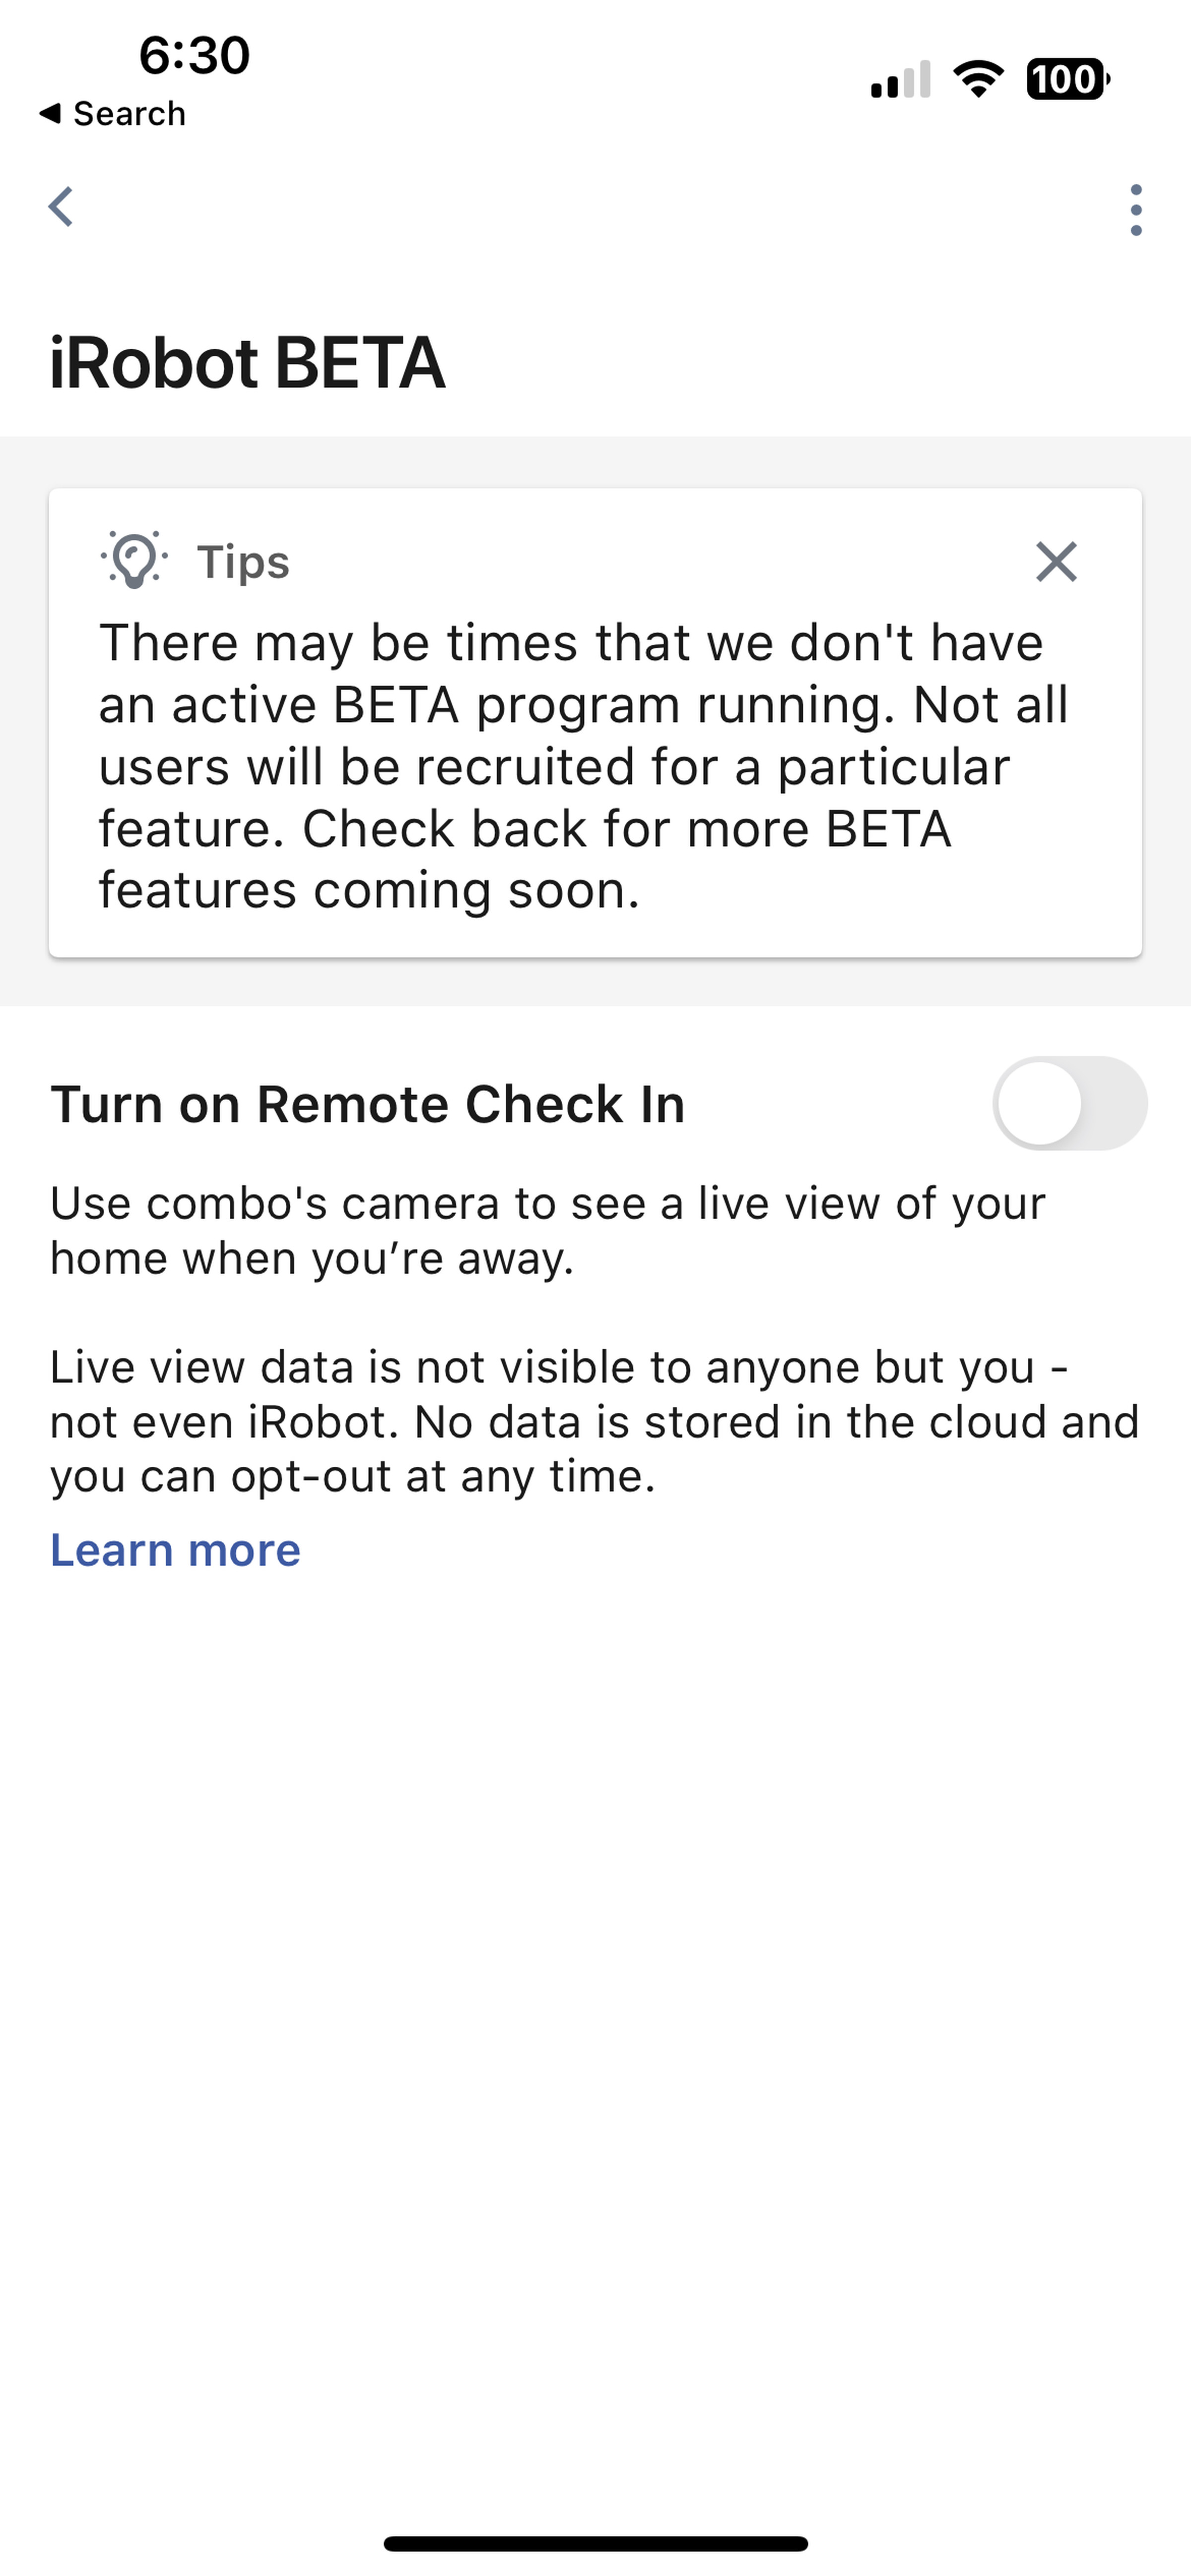 <em>You can turn on Remote Check In in the beta section of the iRobot app on iOS devices.</em>